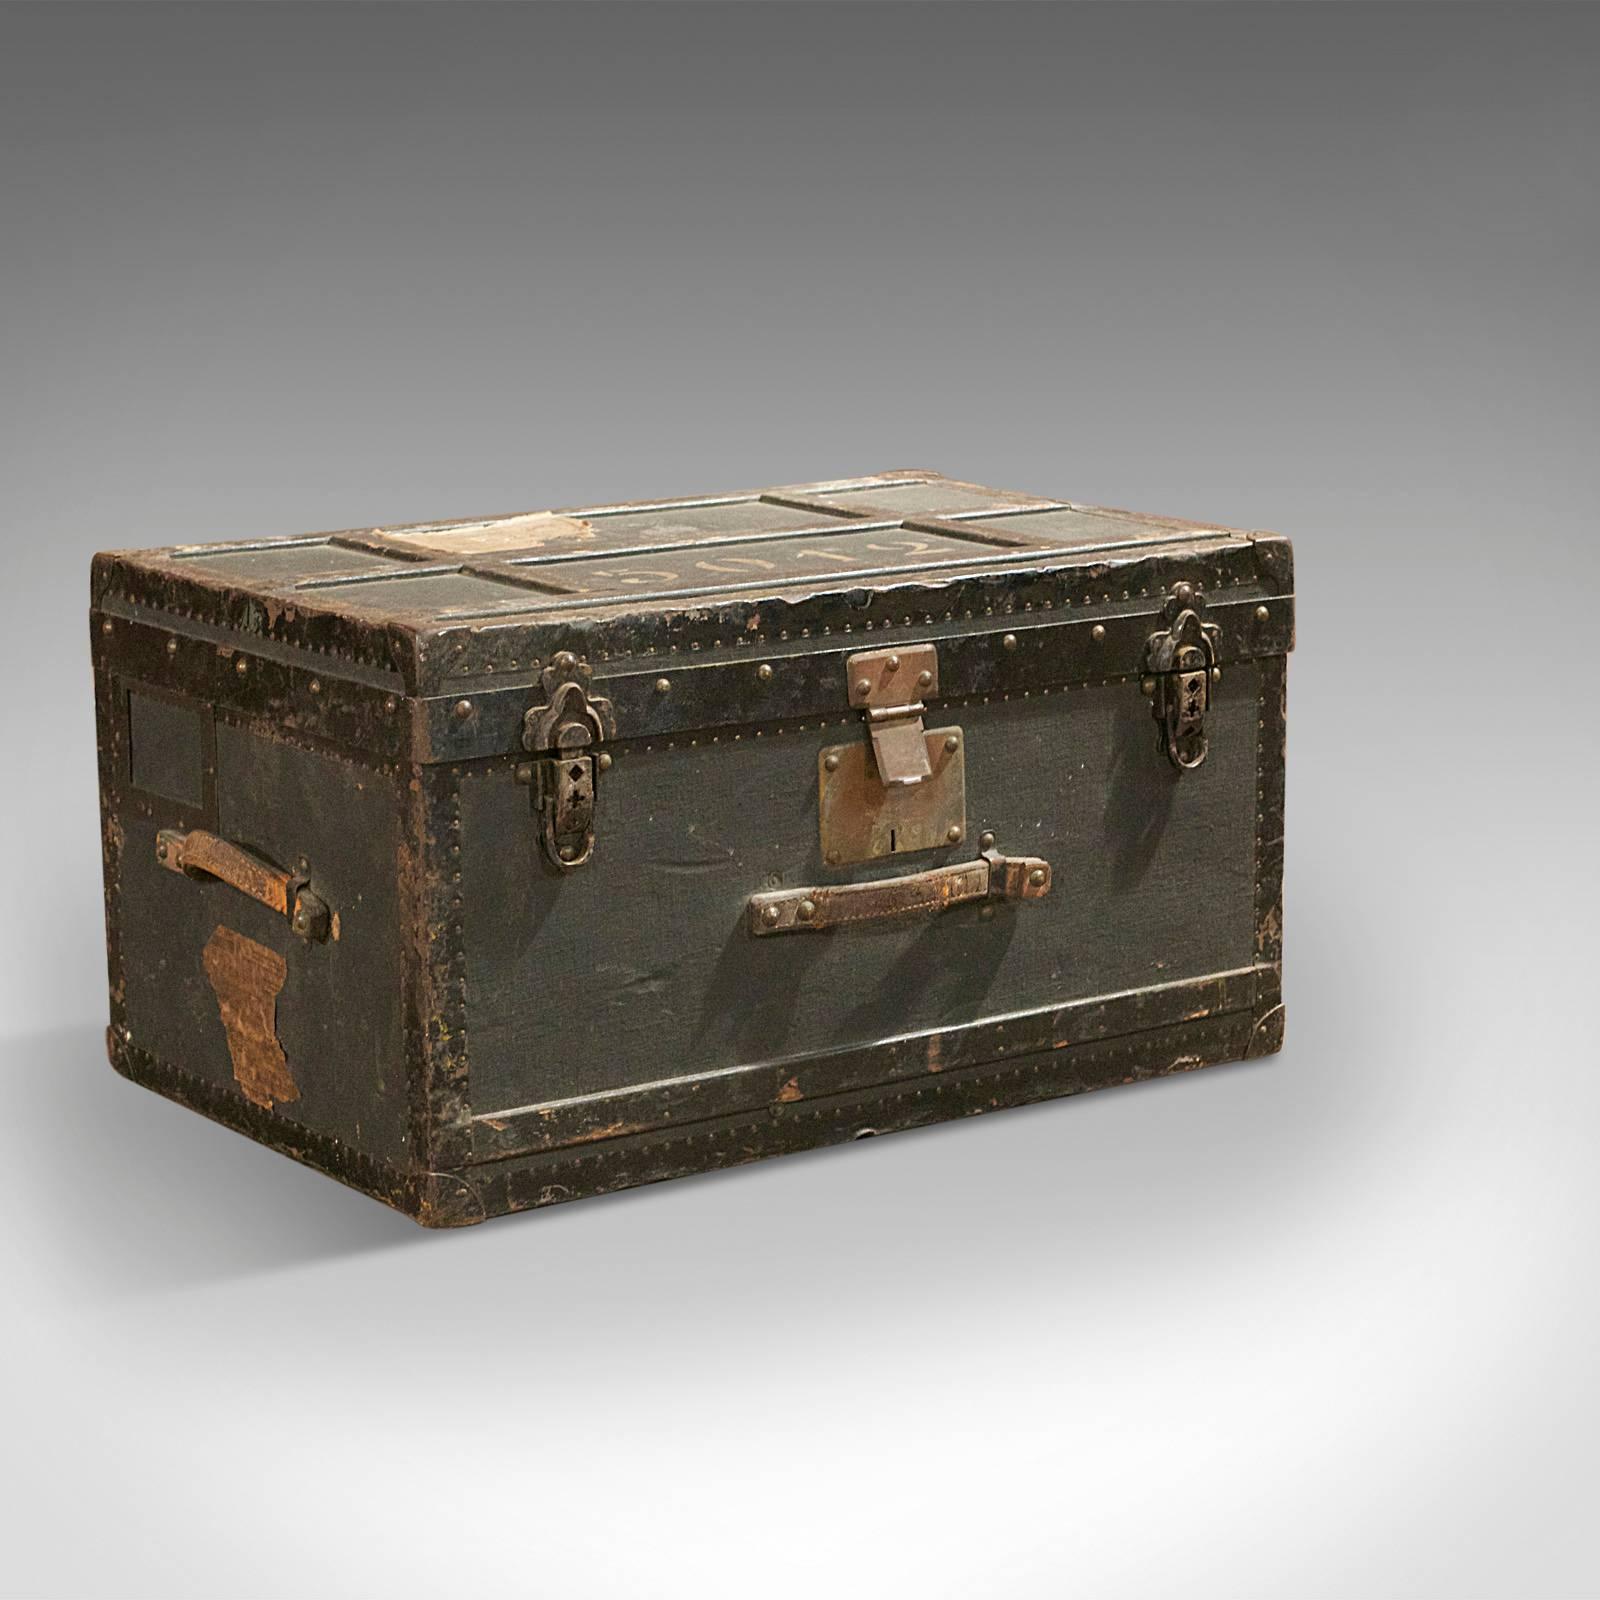 This is an antique Swiss military officer's trunk dating to the early 20th century.

Featuring original labels including the packing sheet inside the lid, this metal bound officer's trunk is triple hinged with the original clasps closing it